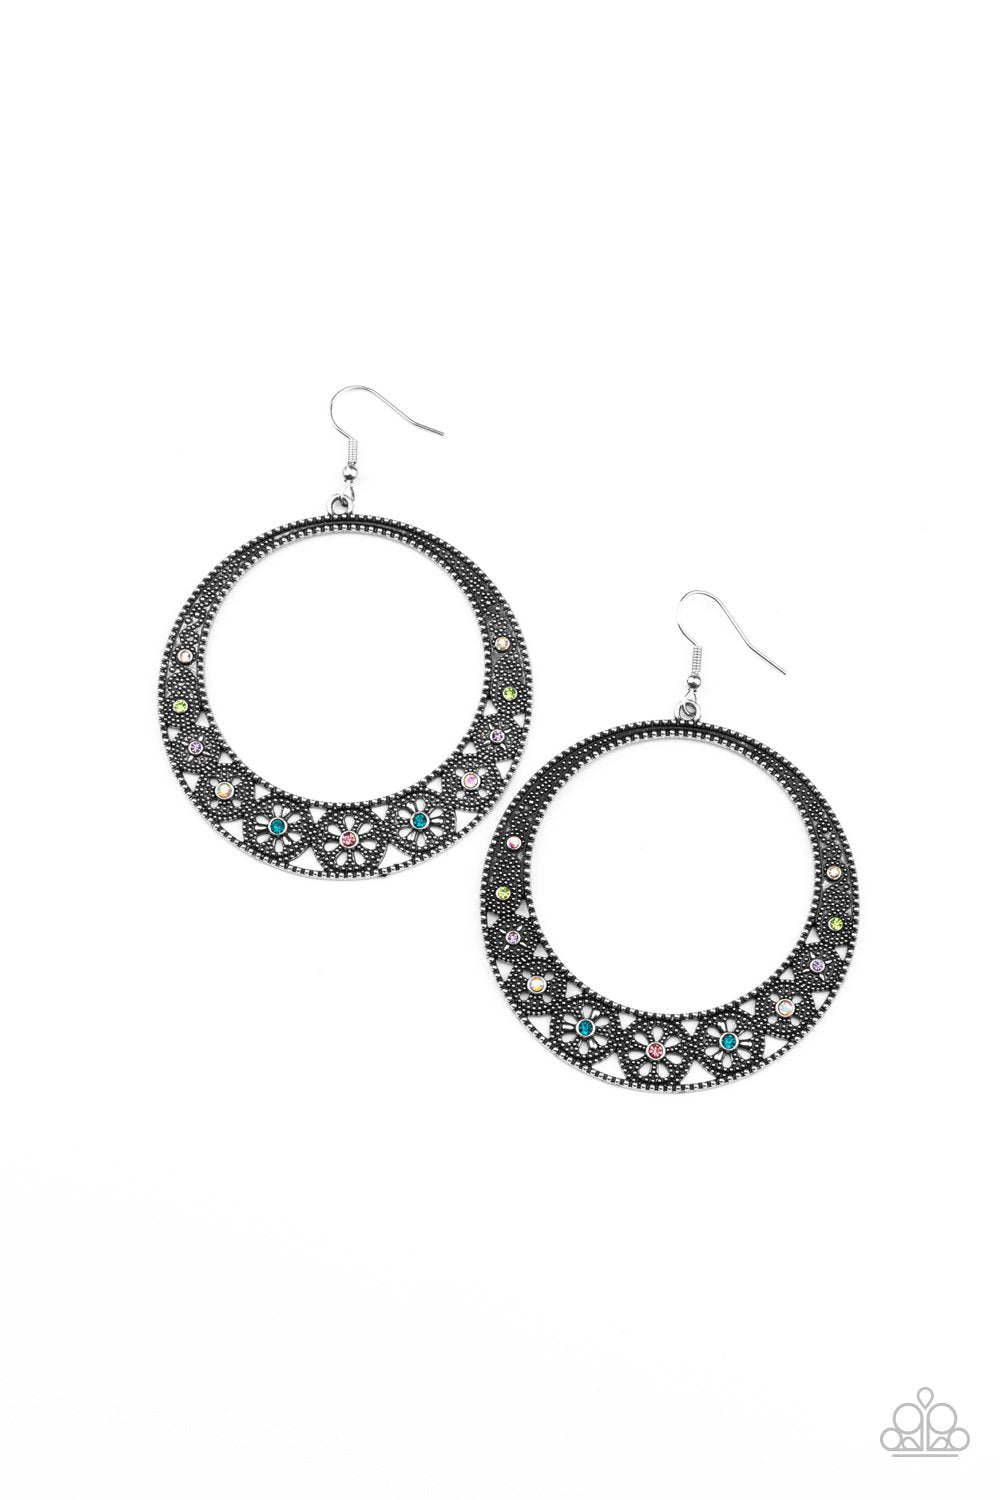 Bodaciously Blooming Multi Rhinestone and Filigree Earrings - Paparazzi Accessories- lightbox - CarasShop.com - $5 Jewelry by Cara Jewels